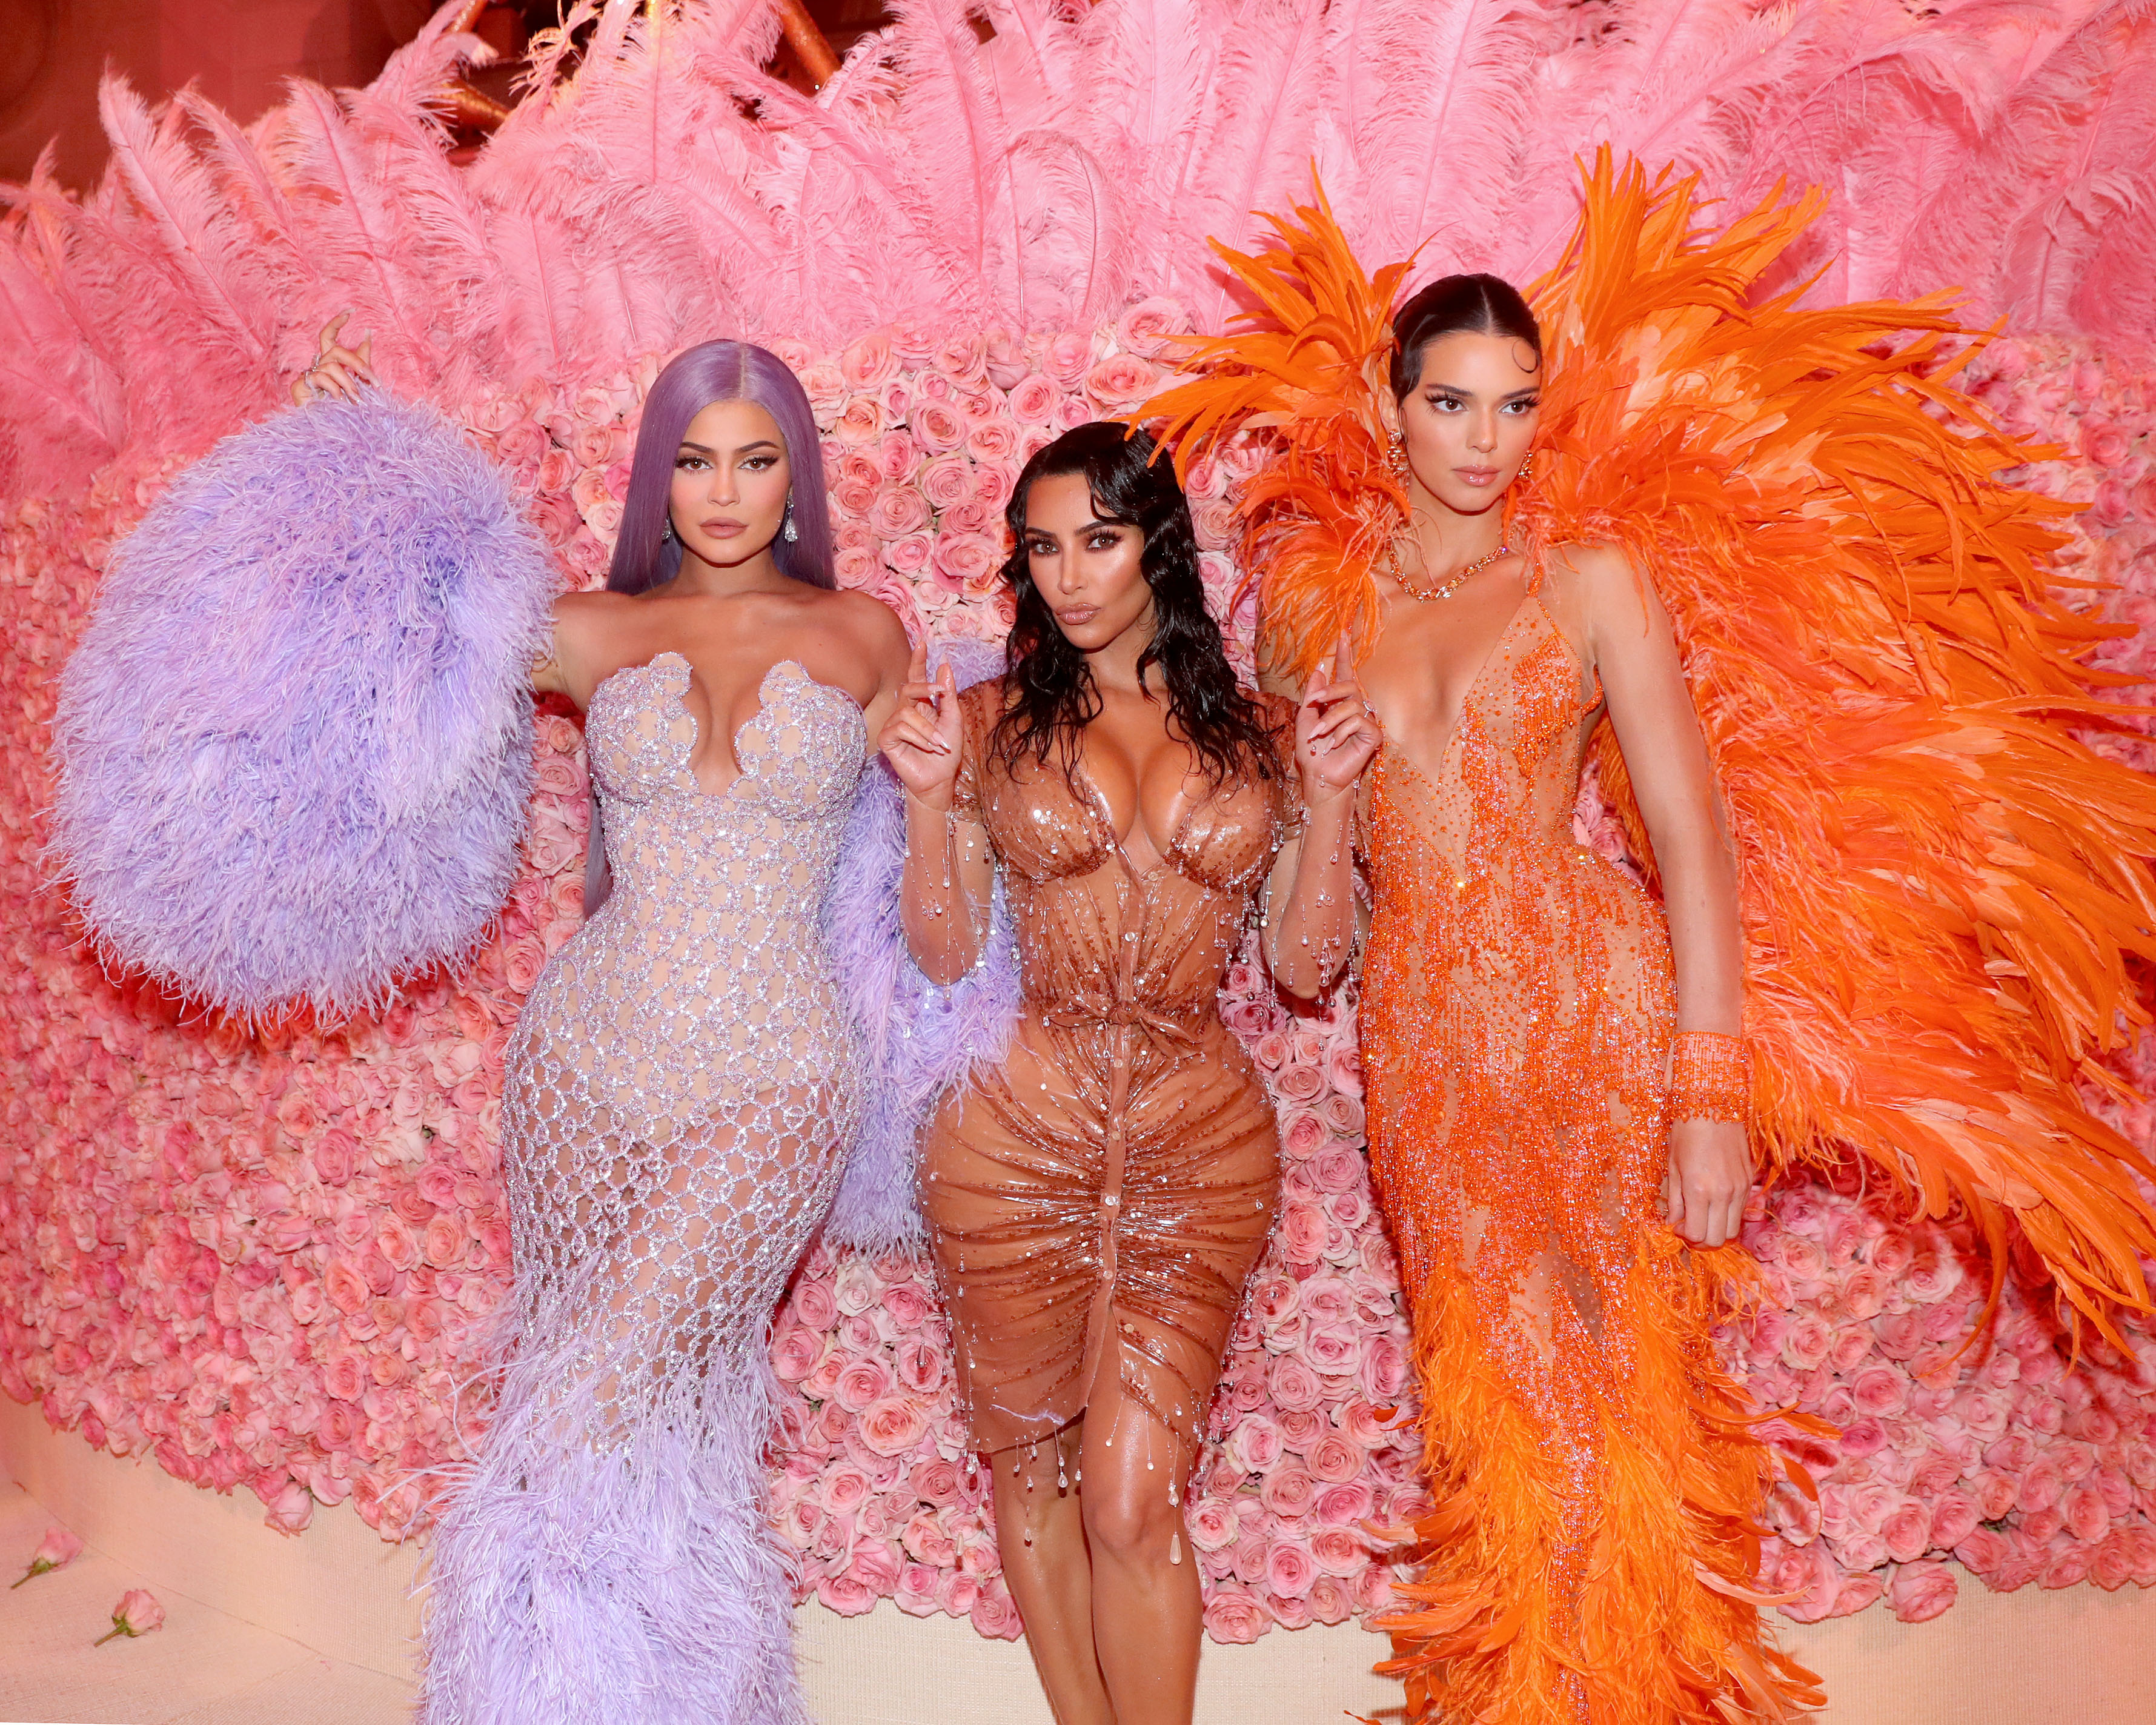 The Kardashian family has been spotted at the Met Gala numerous times over the years